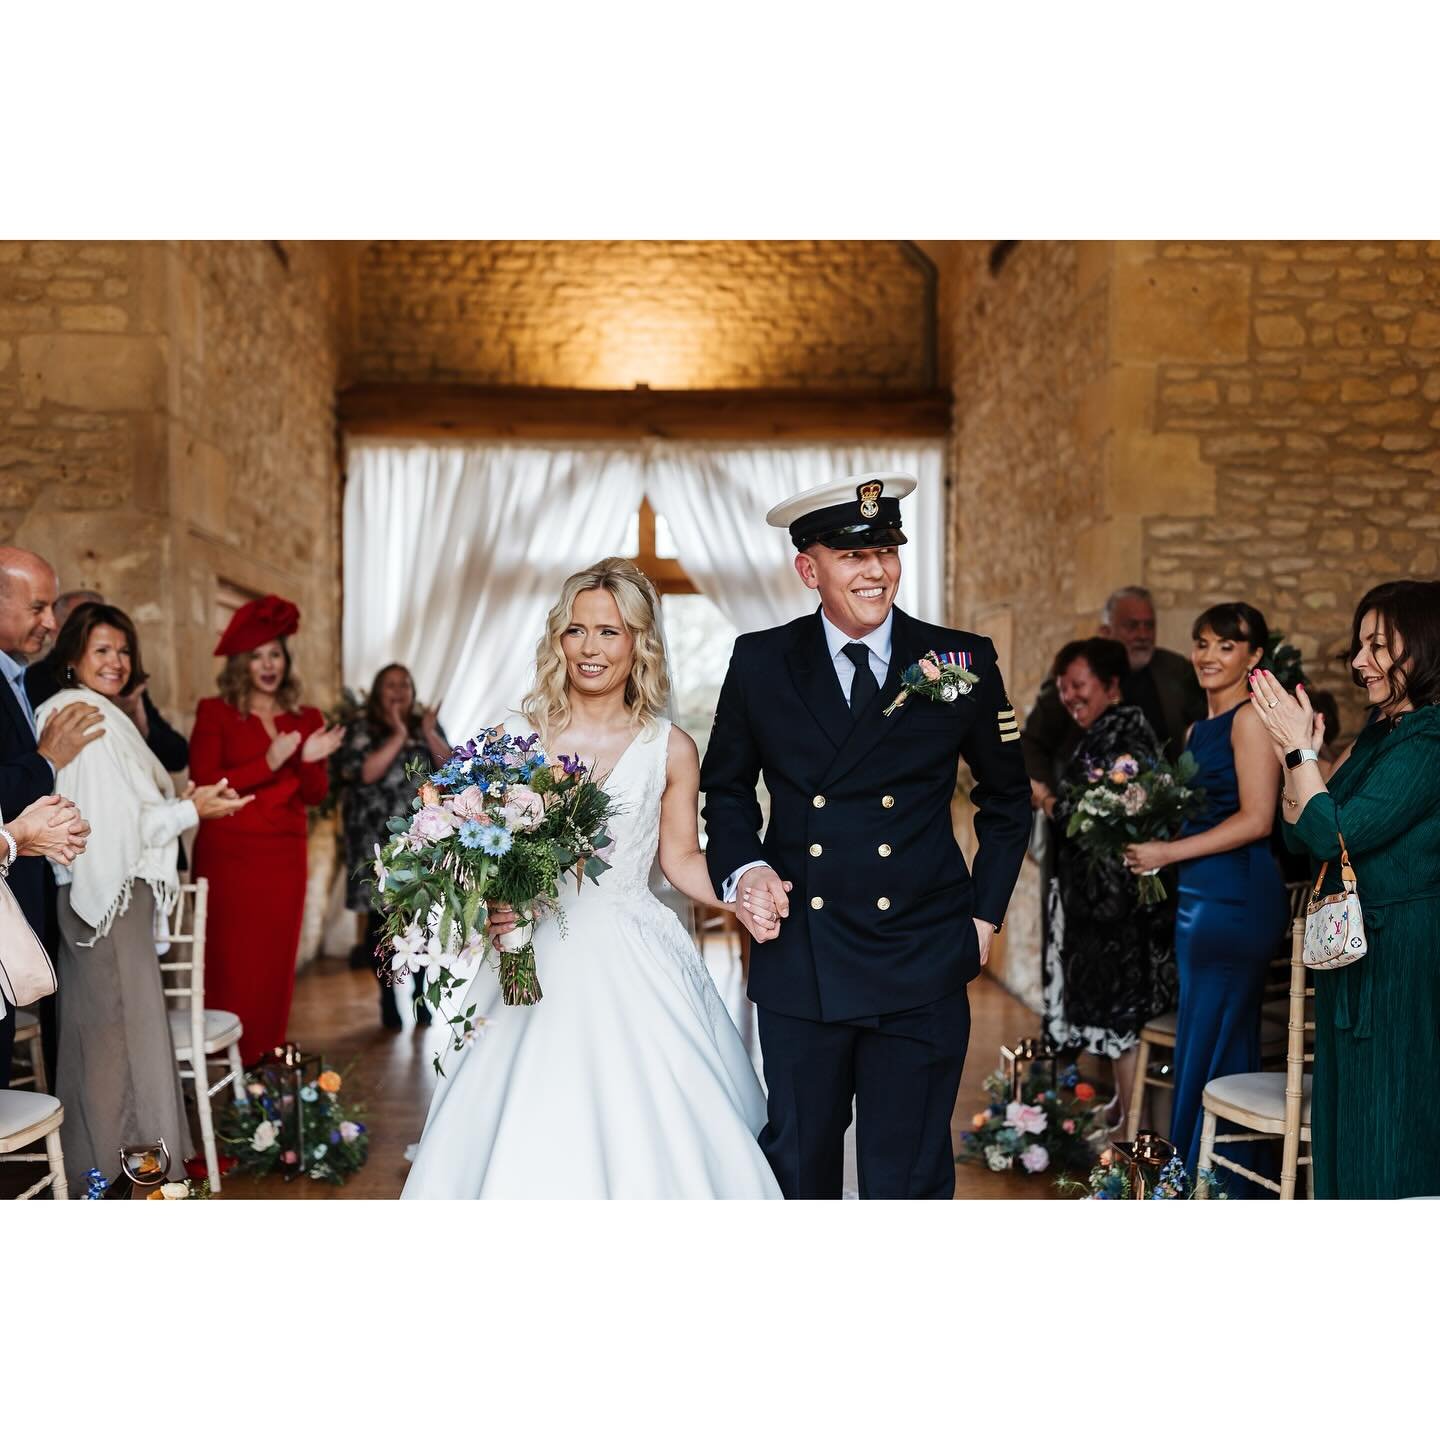 All the love for these two on Saturday. A whirlwind to get here but look at those faces. Finally becoming husband and wife as everyone they love surrounded them with laughter. 

@_paigeambermua_ 
@lynnejessettfloristry 
@epiccaterersuk 

#navywedding